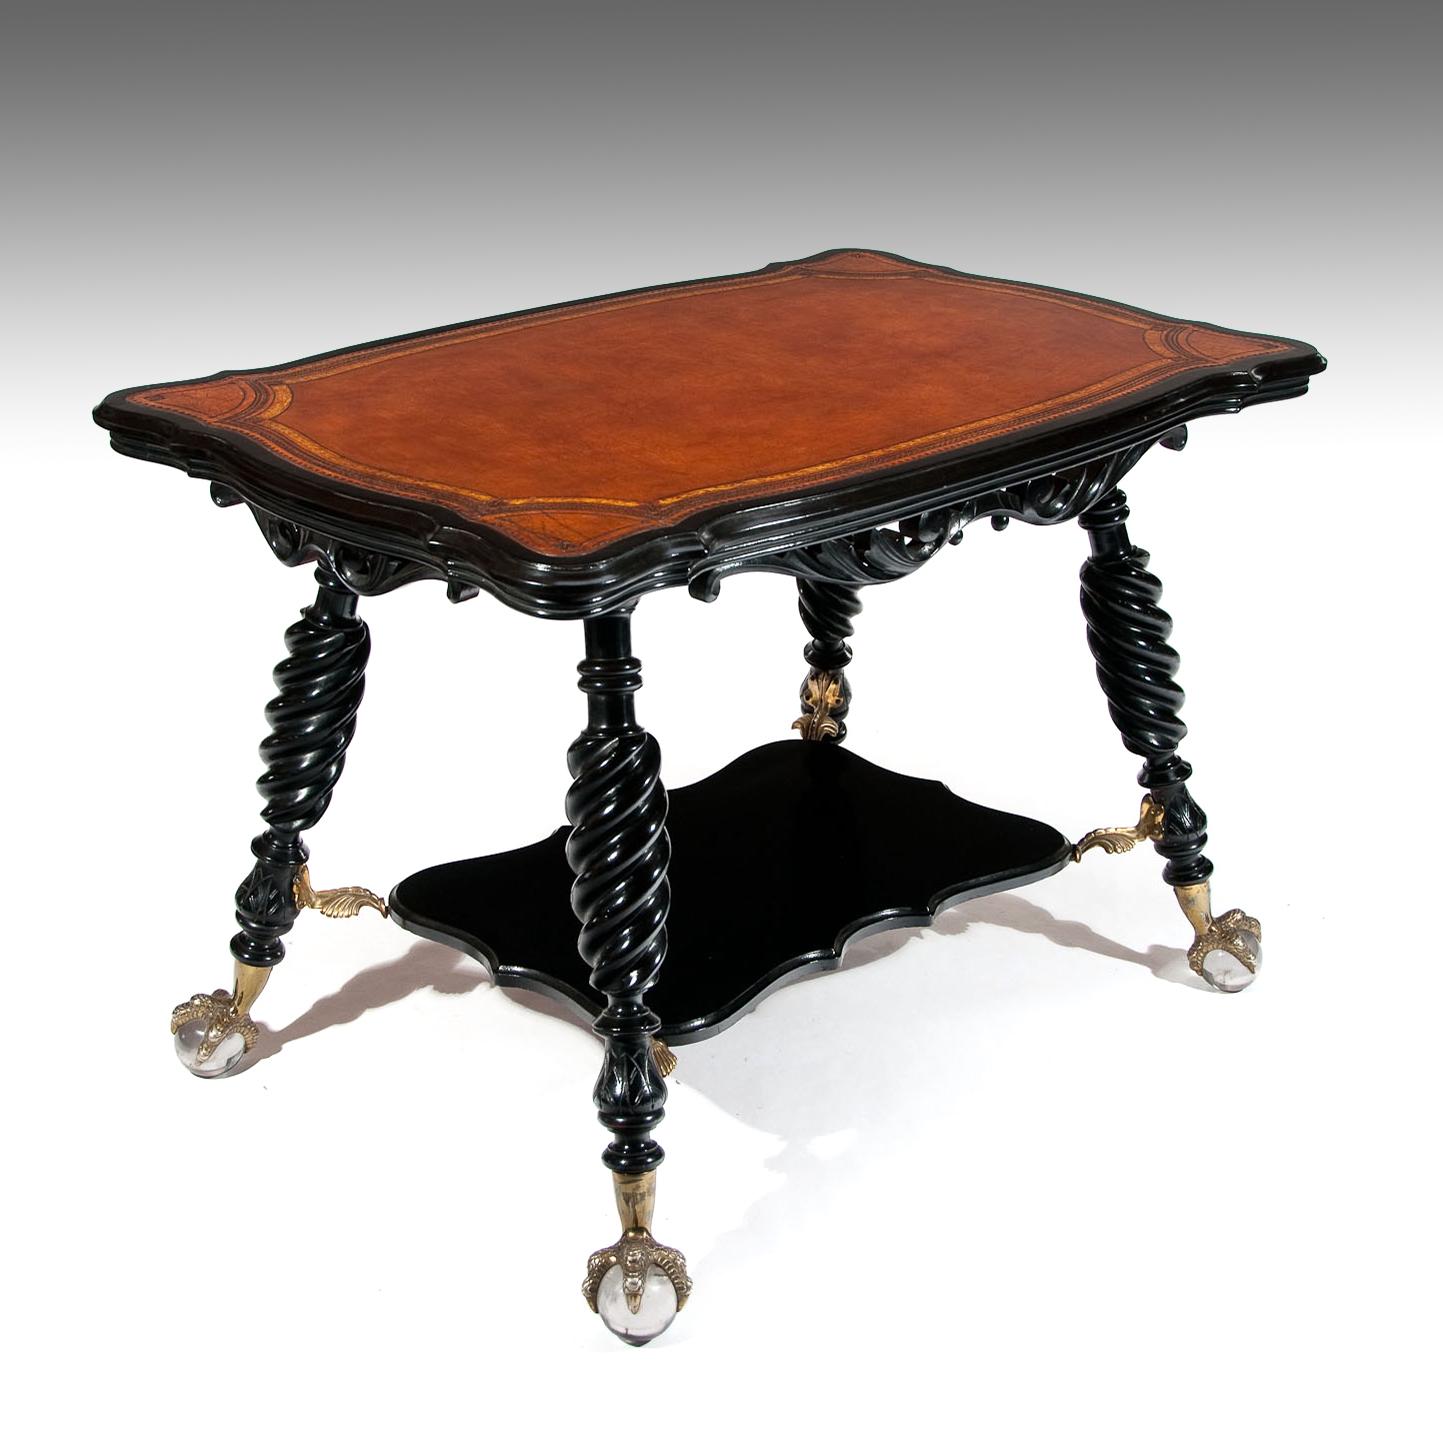 Very good quality antique serpentine shaped and later ebonised leather centre table attributed to Merklen Brothers of America New York.

America, New York, circa 1890.

The shaped top having a later tan leather insert which is gilt and blind